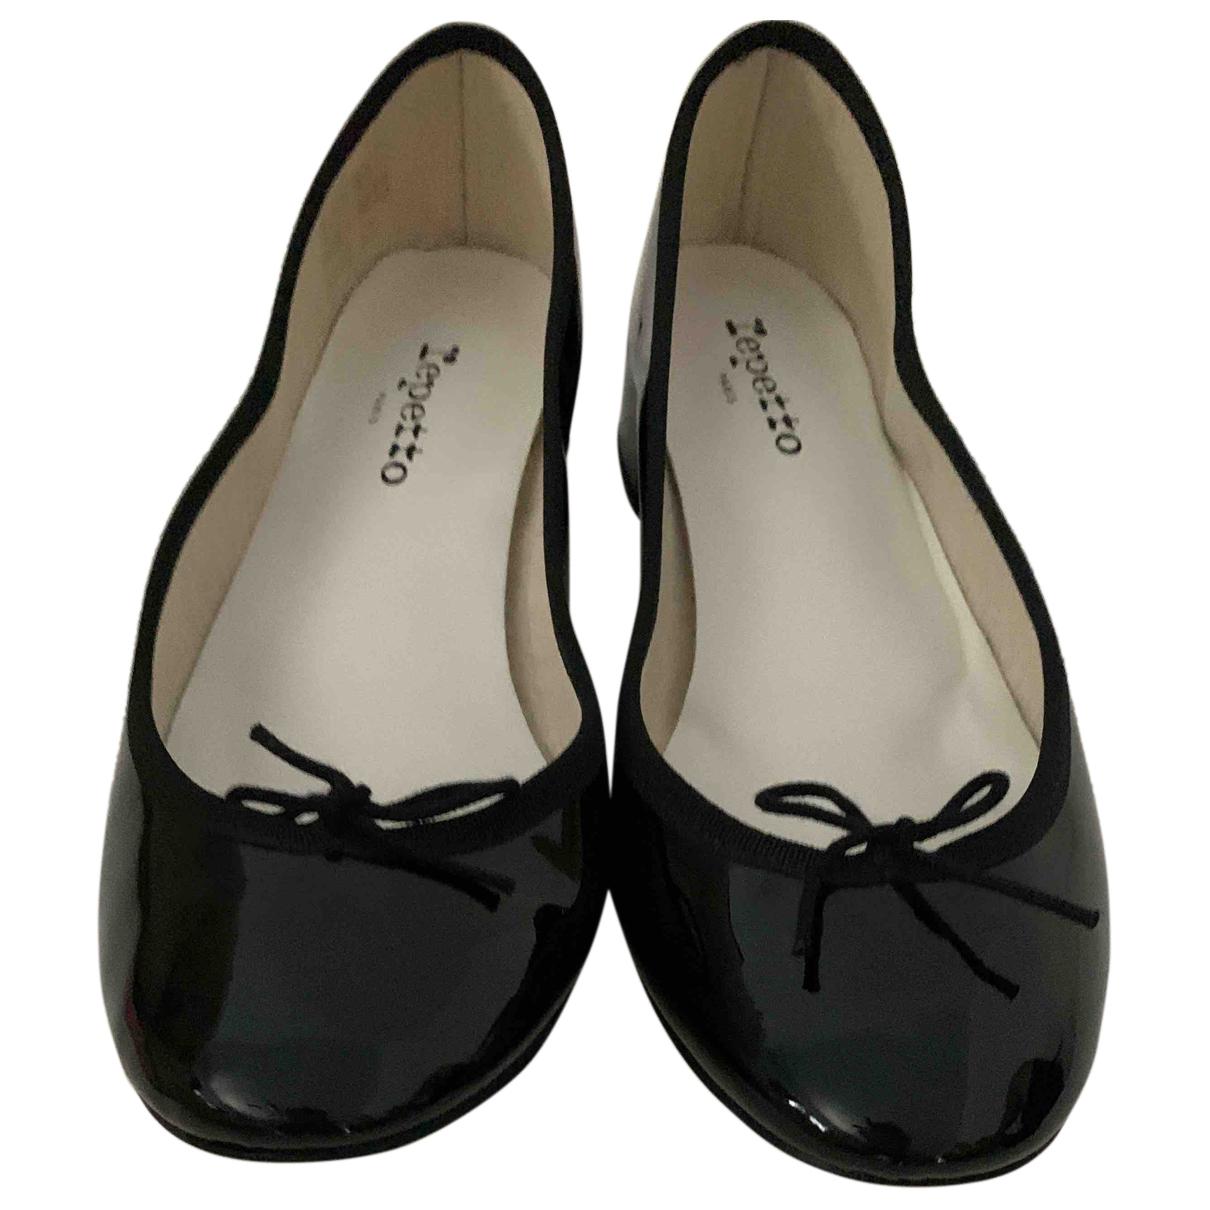 Repetto Patent Leather Ballet Flats in Black - Lyst